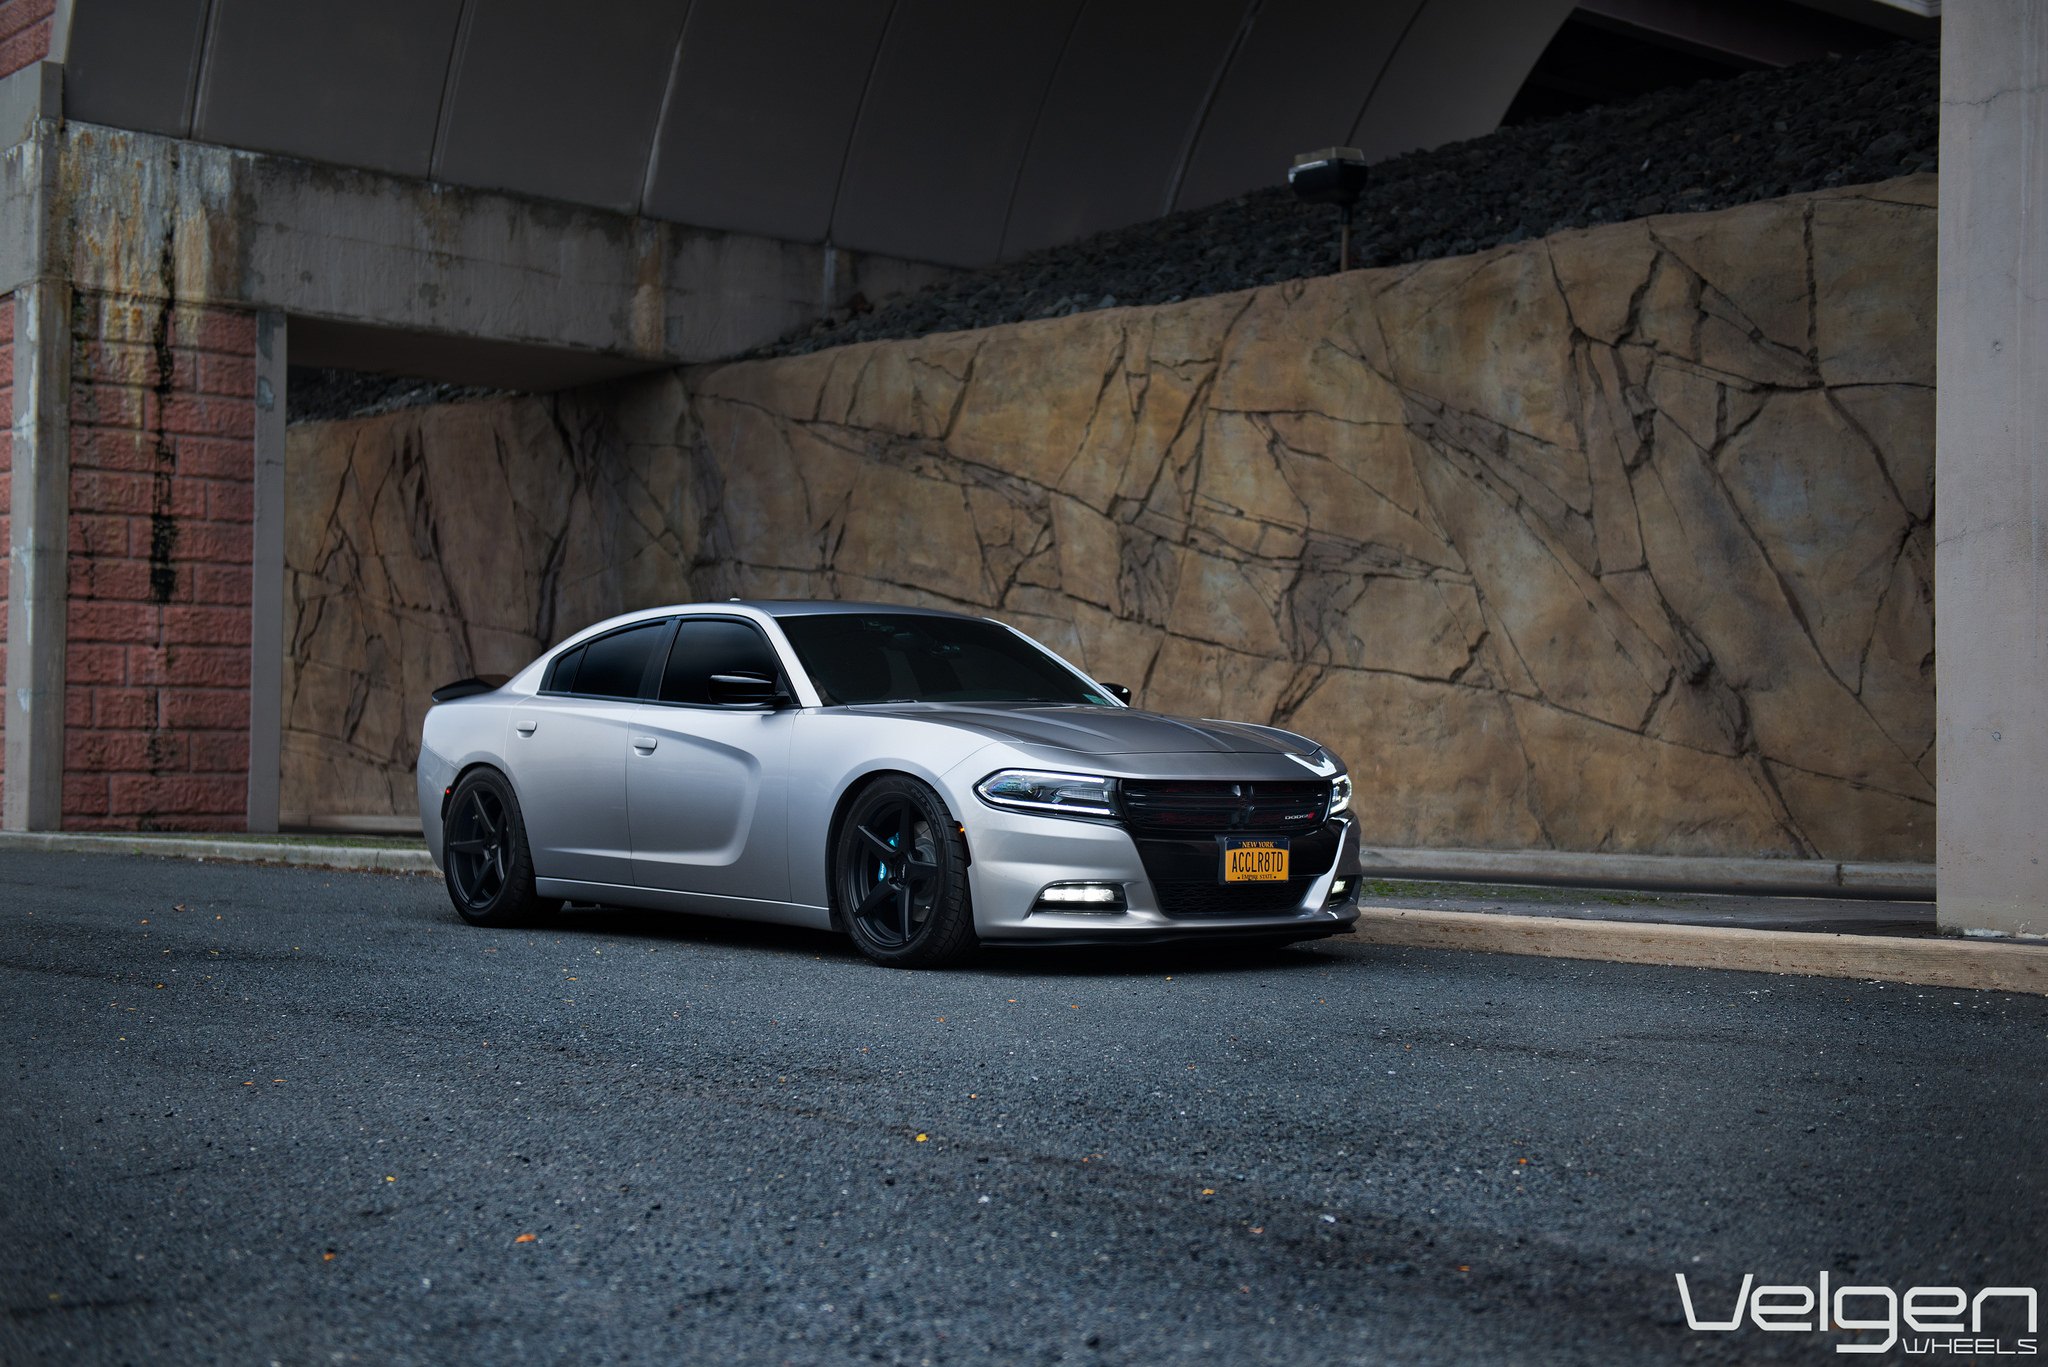 Front Bumper with LED Lights on Silver Dodge Charger - Photo by Velgen